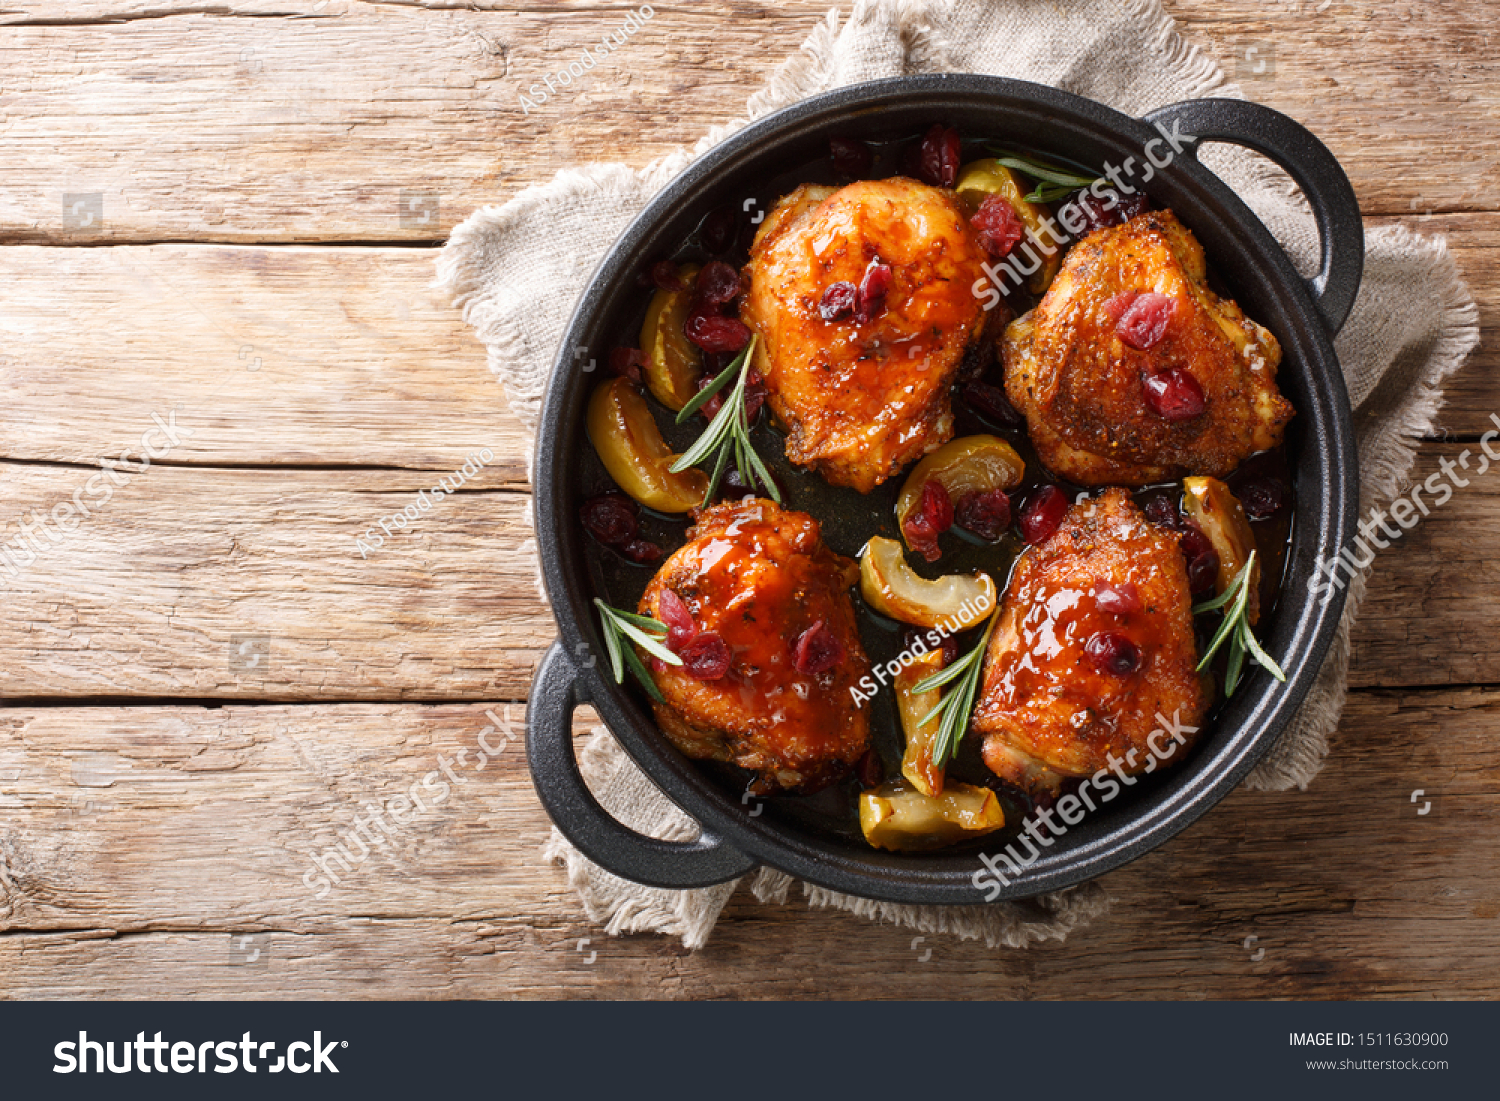 Crispy fragrant baked chicken thighs with apples, cranberries and rosemary closeup in a pan on the table. horizontal top view from above #1511630900